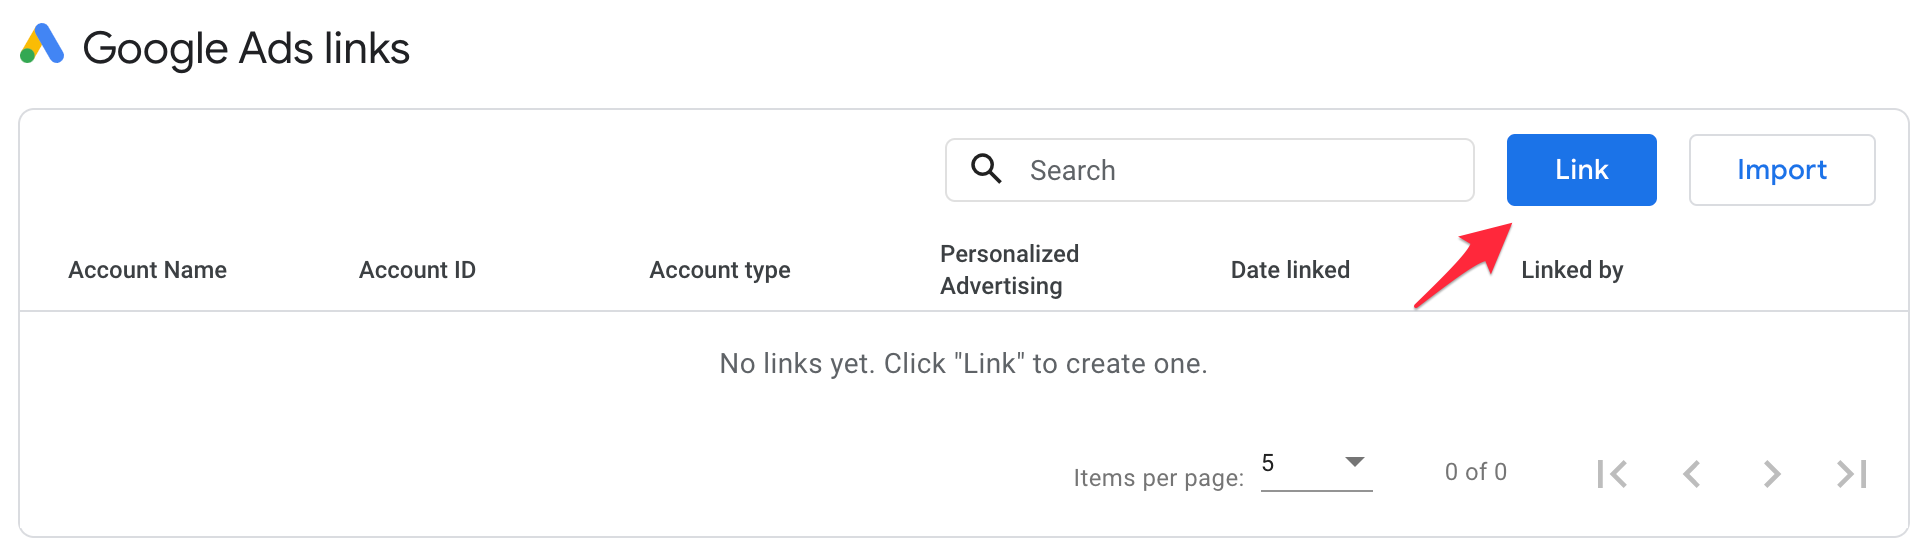 Link between Google Ads and Analytics 4 accounts